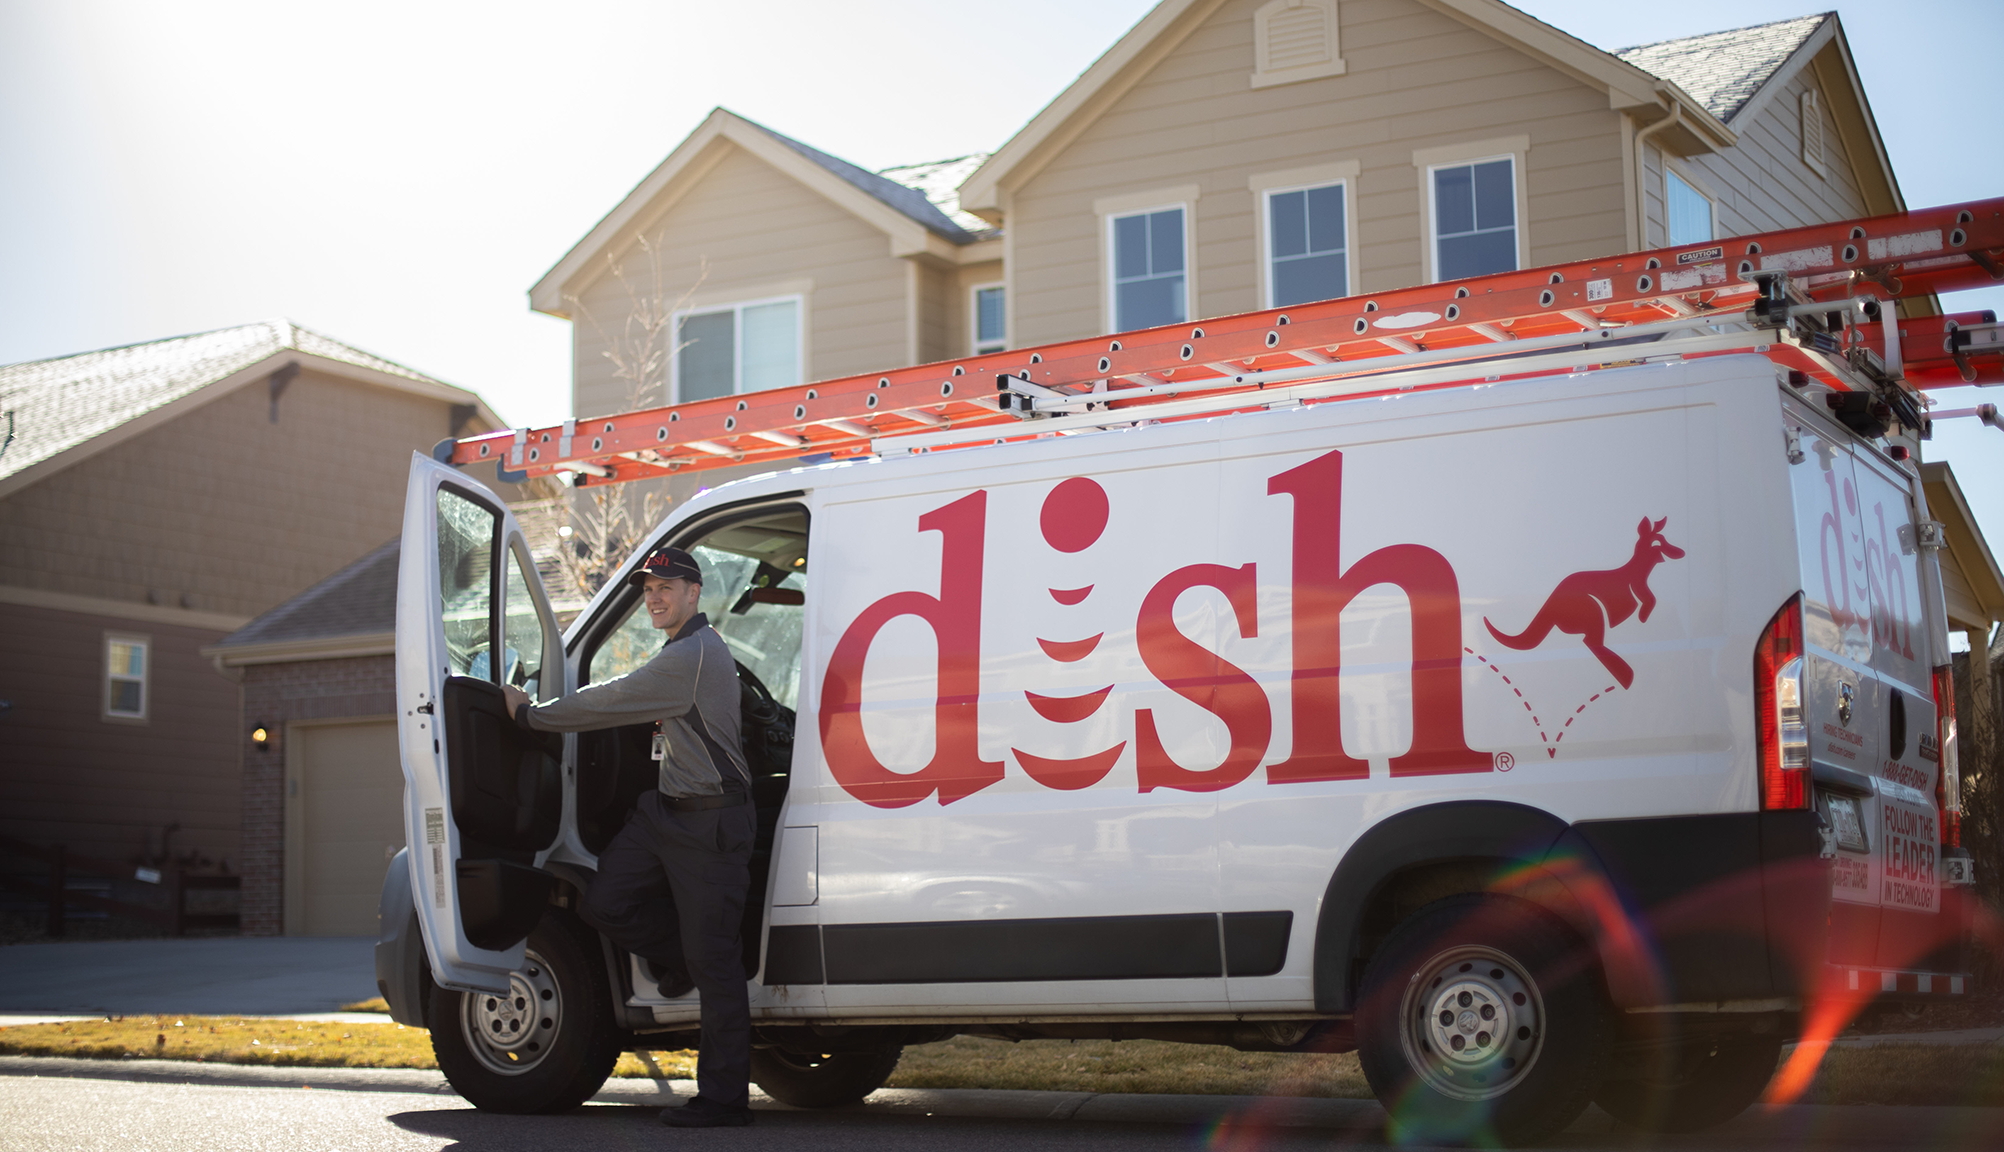 dish tv packages